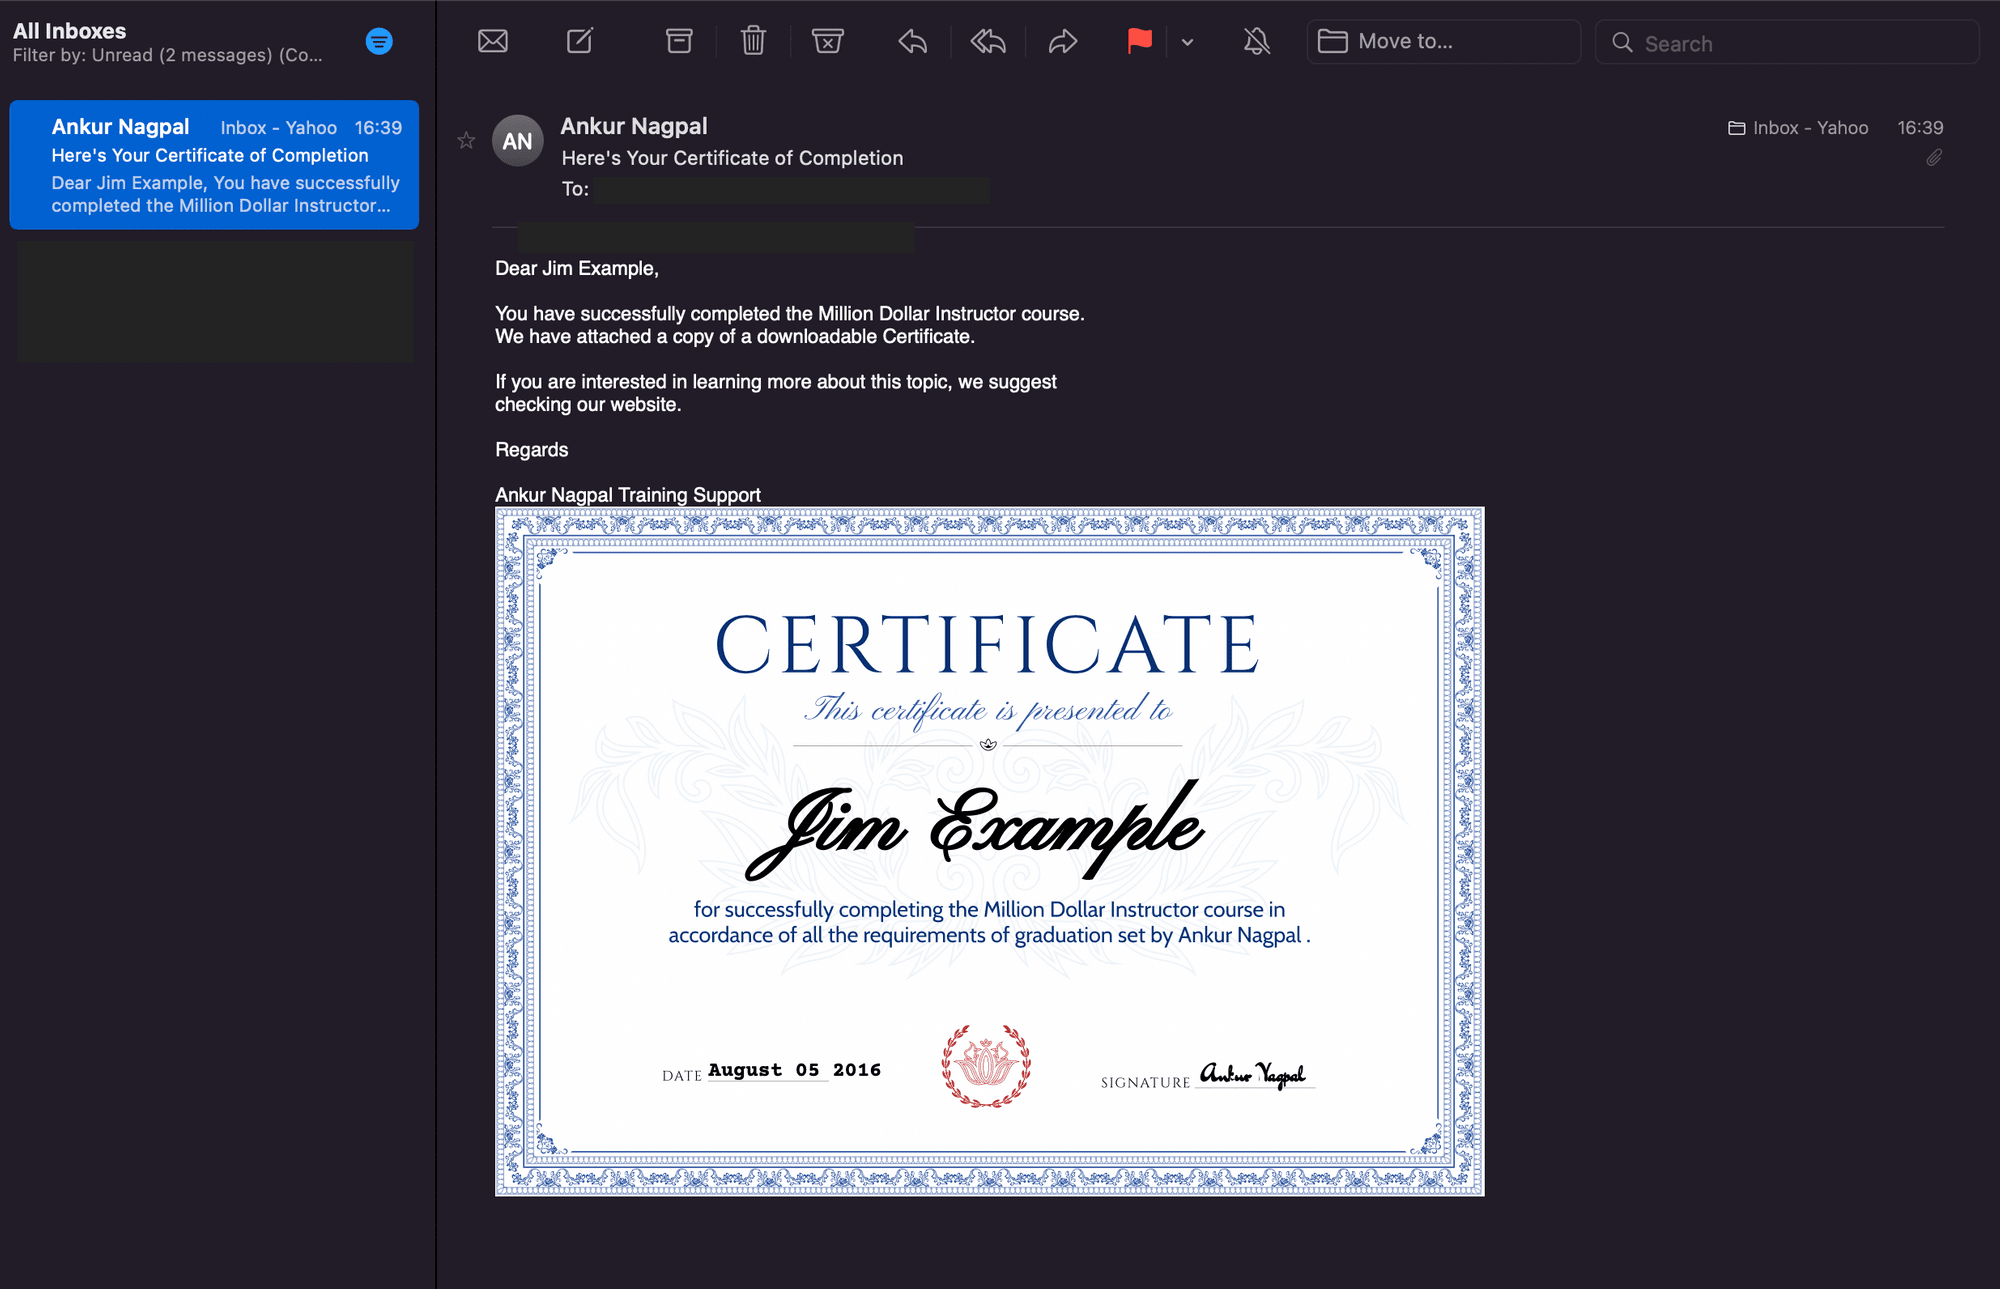 How to Offer Certificates of Completion in Your Online Course